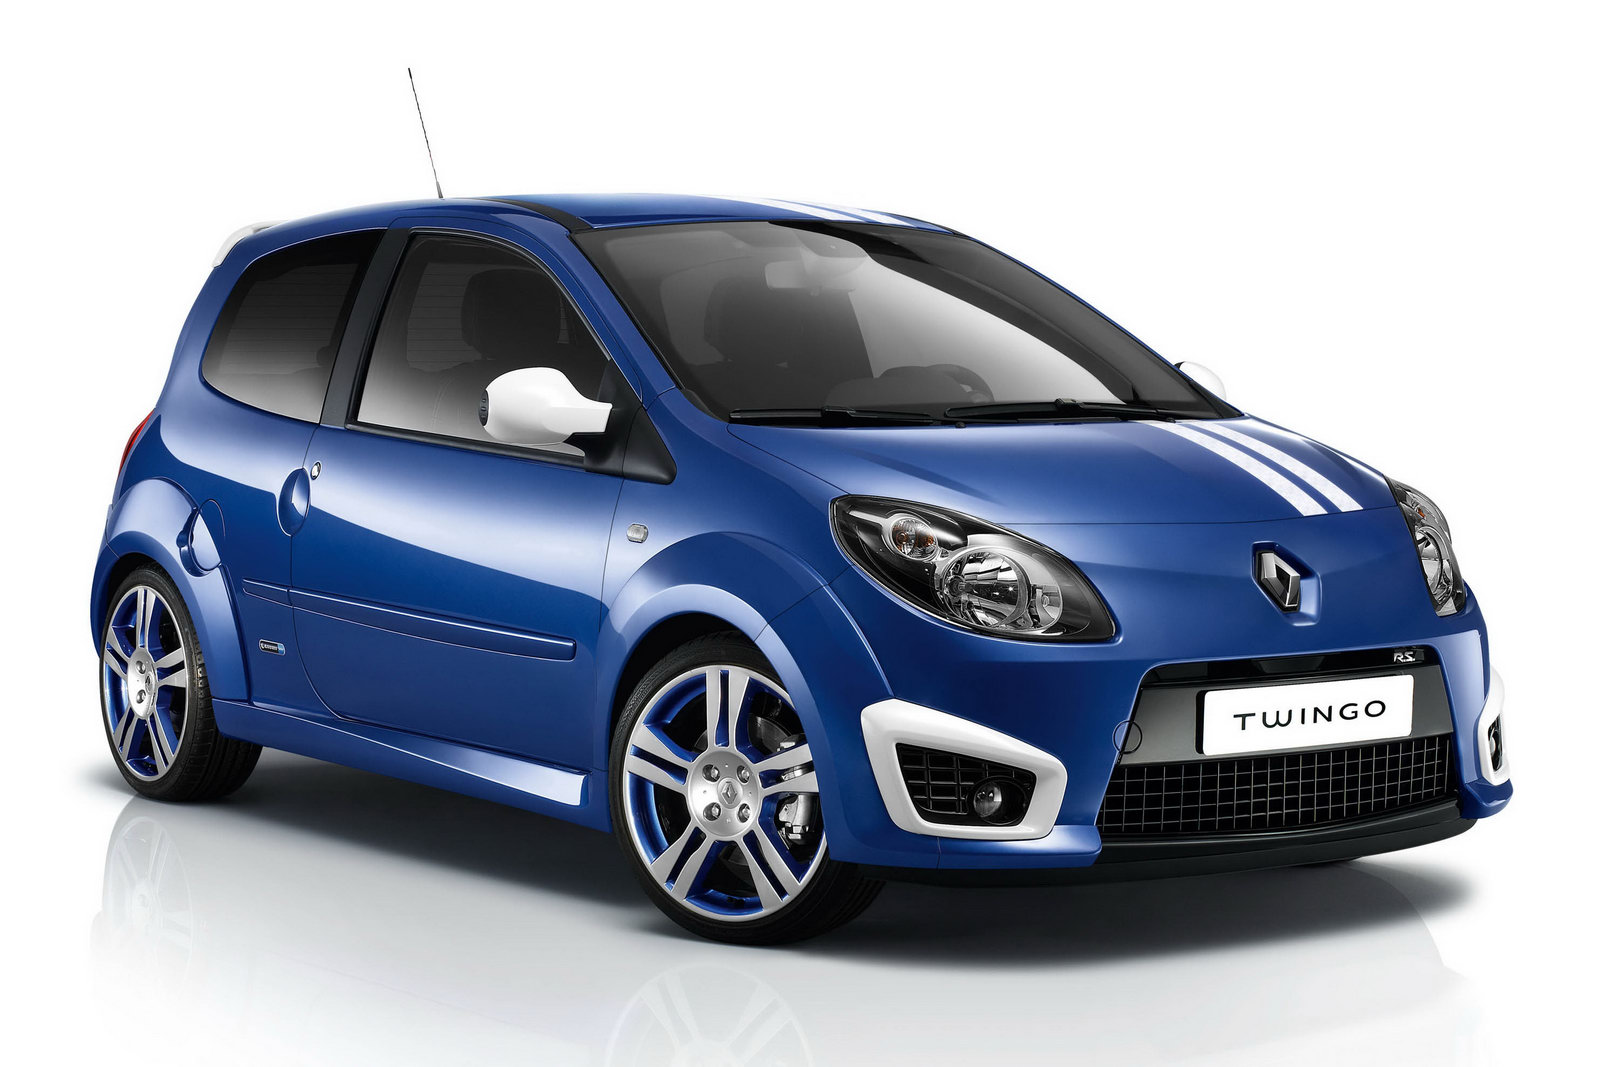 Coches fiables: Renault Twingo